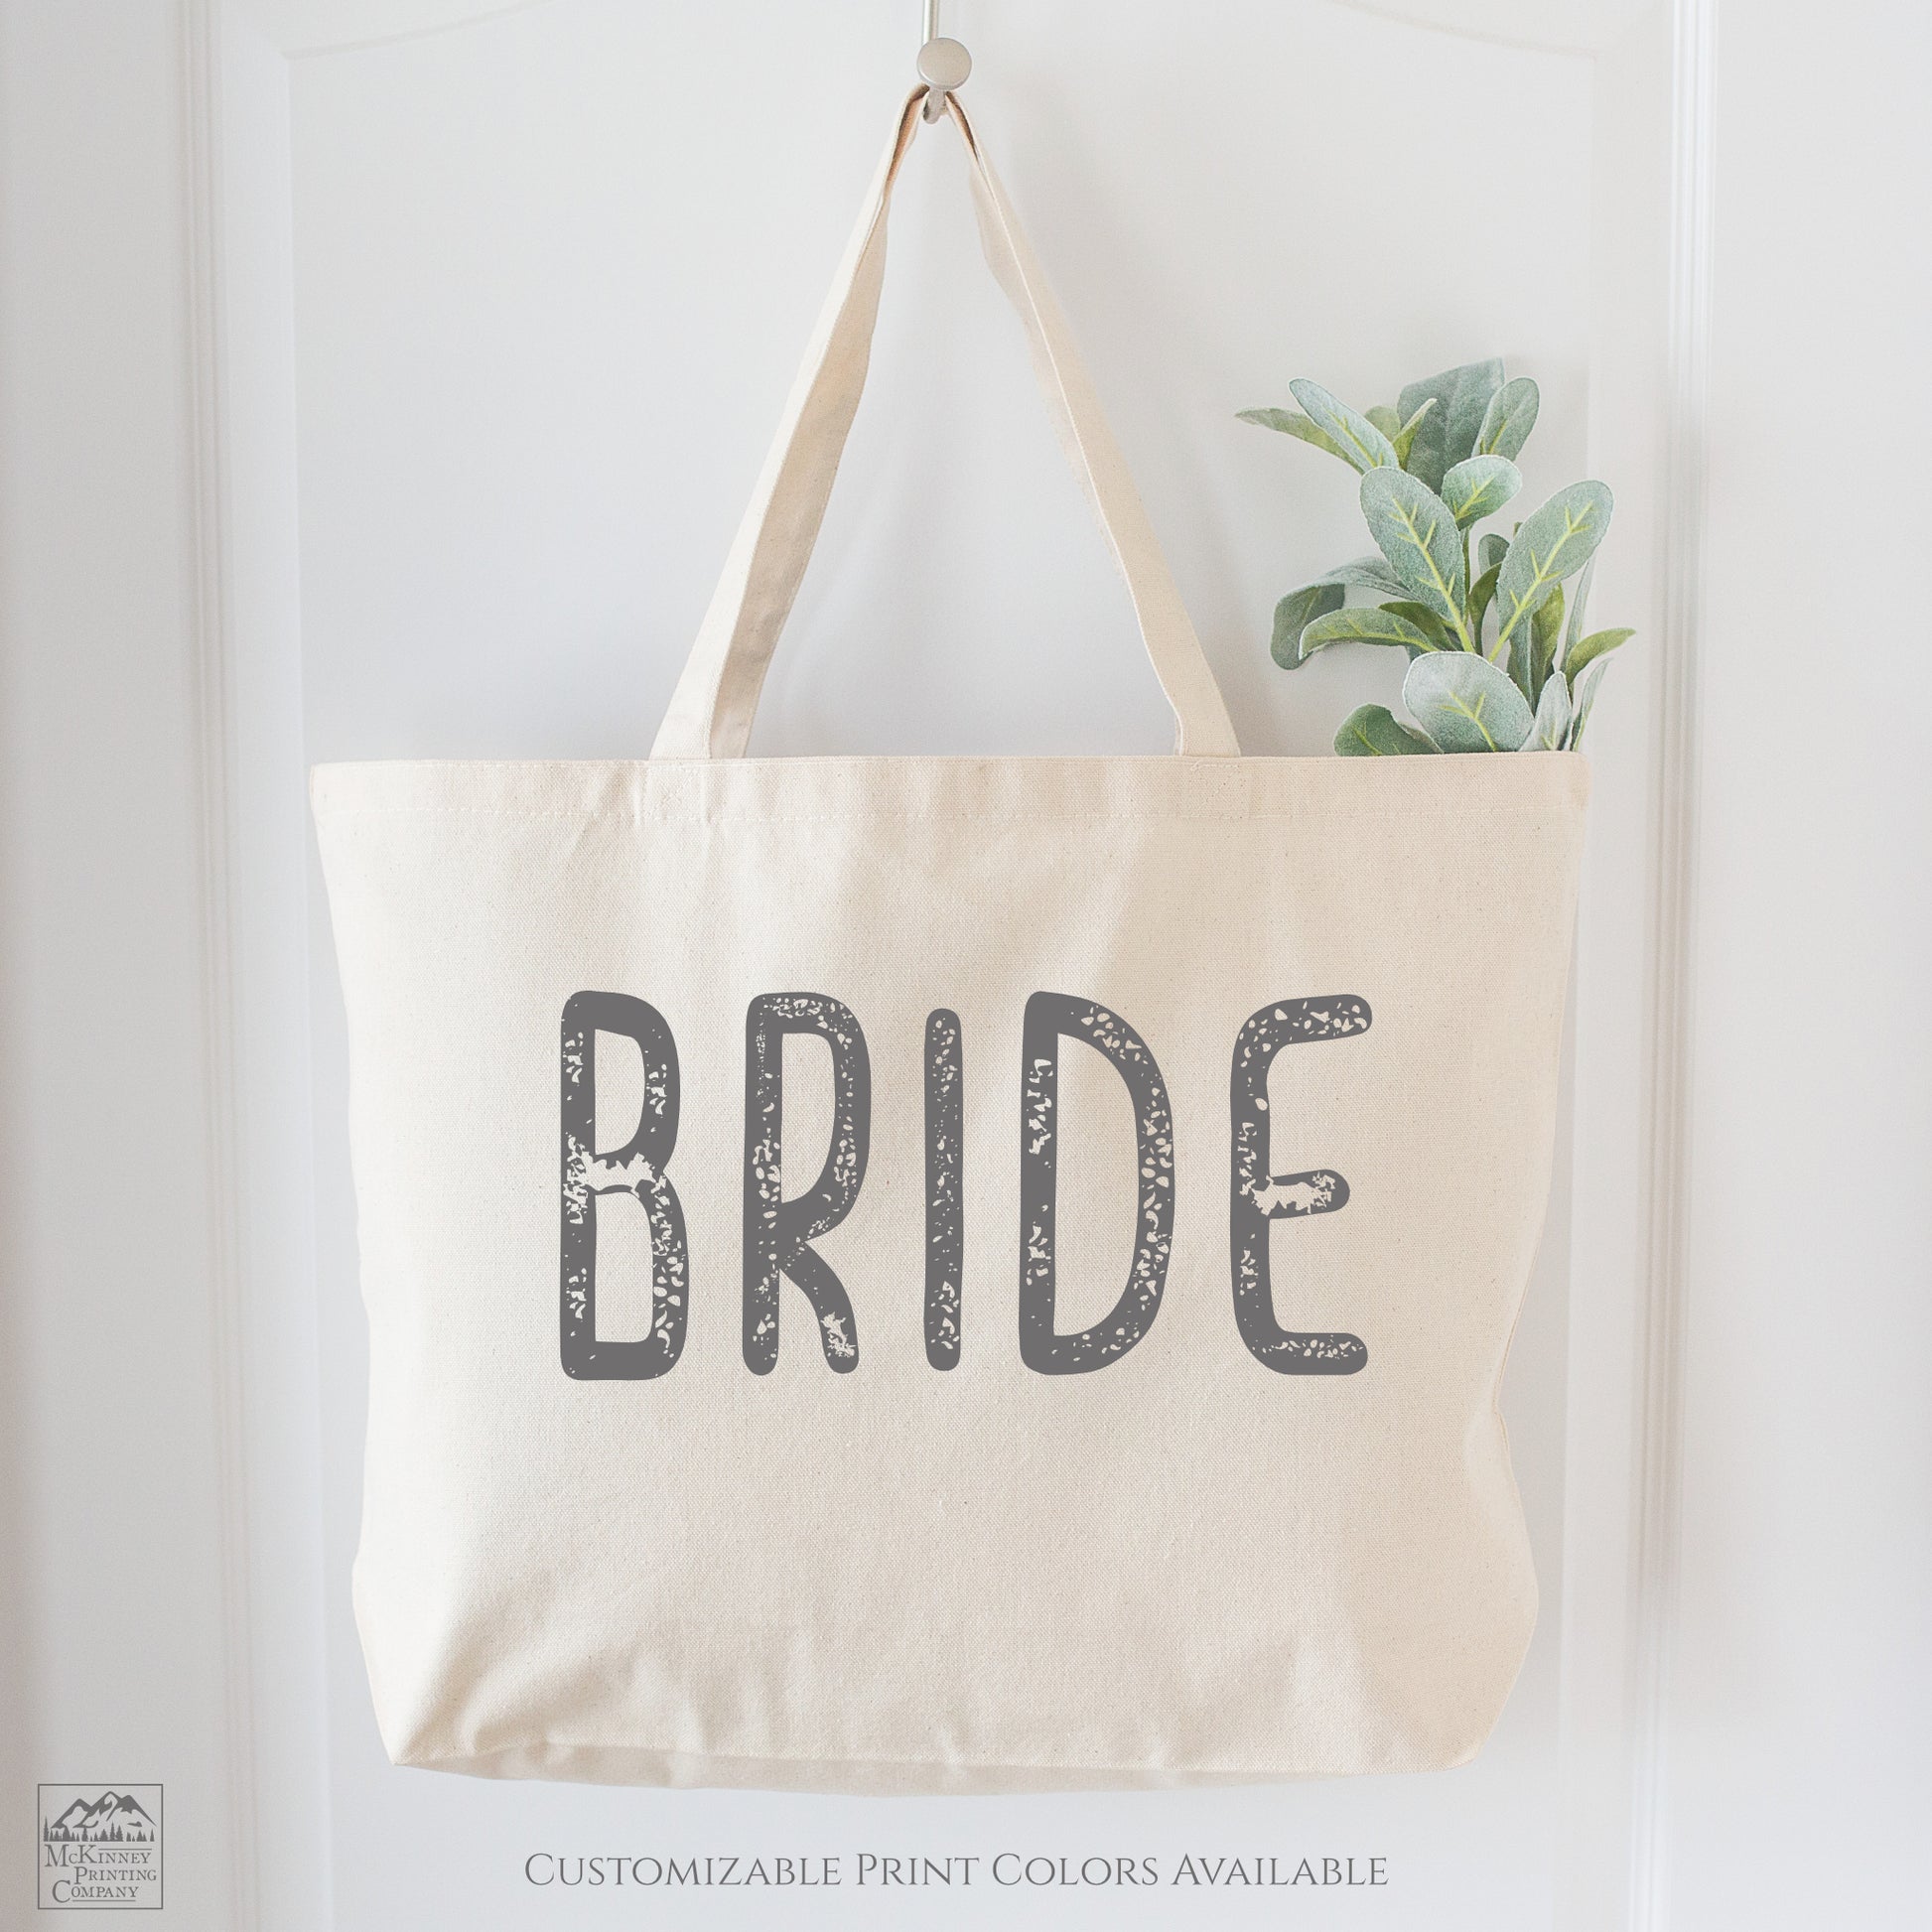 Bride Tote Bag, Bachelorette Travel Tote, Canvas Tote Bag with Zipper, Large